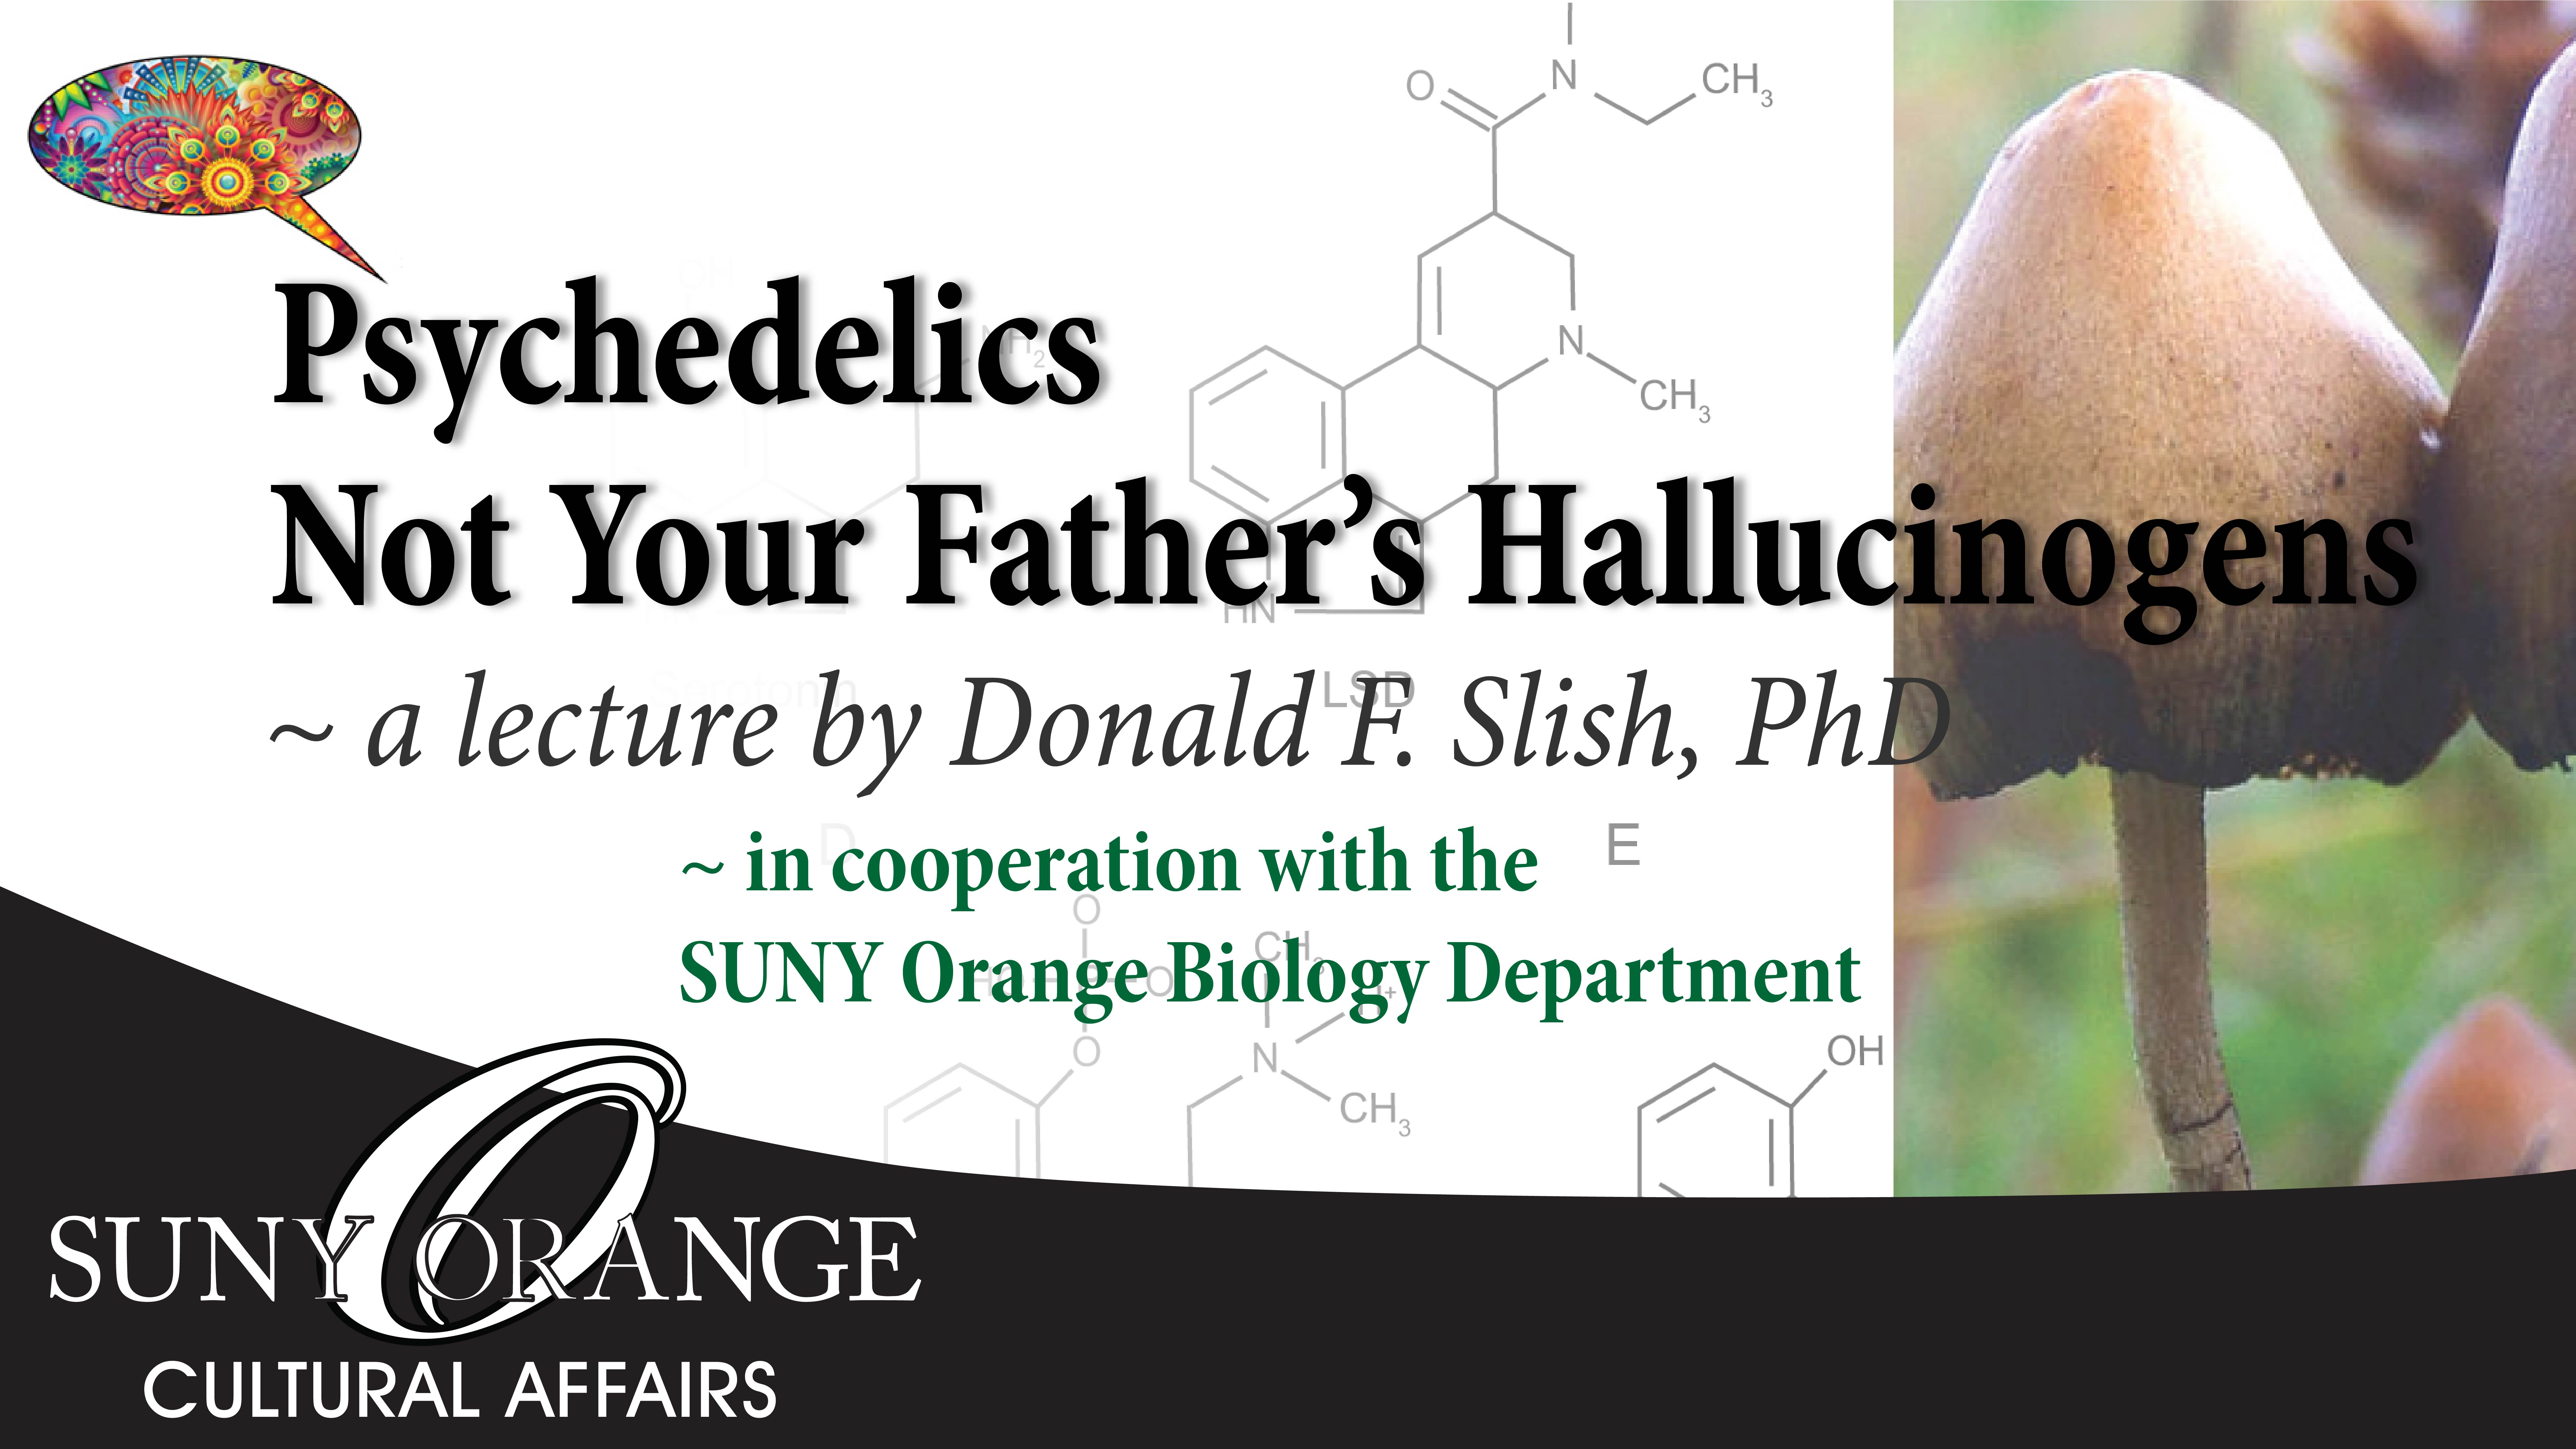 Psychedelics - Not Your Father's Hallucinogens